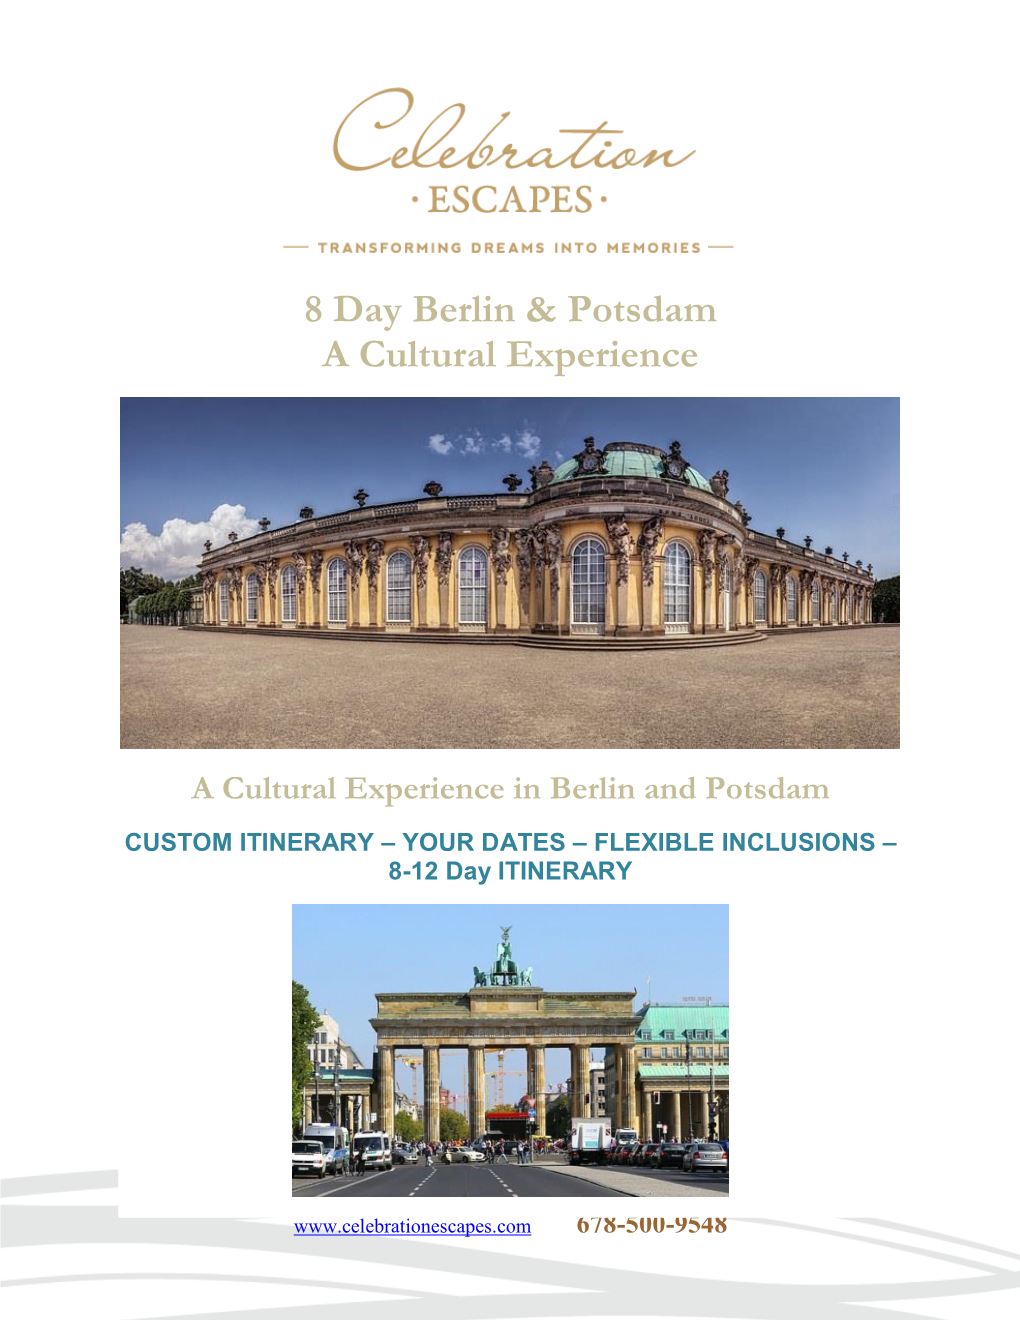 8 Day Berlin & Potsdam a Cultural Experience